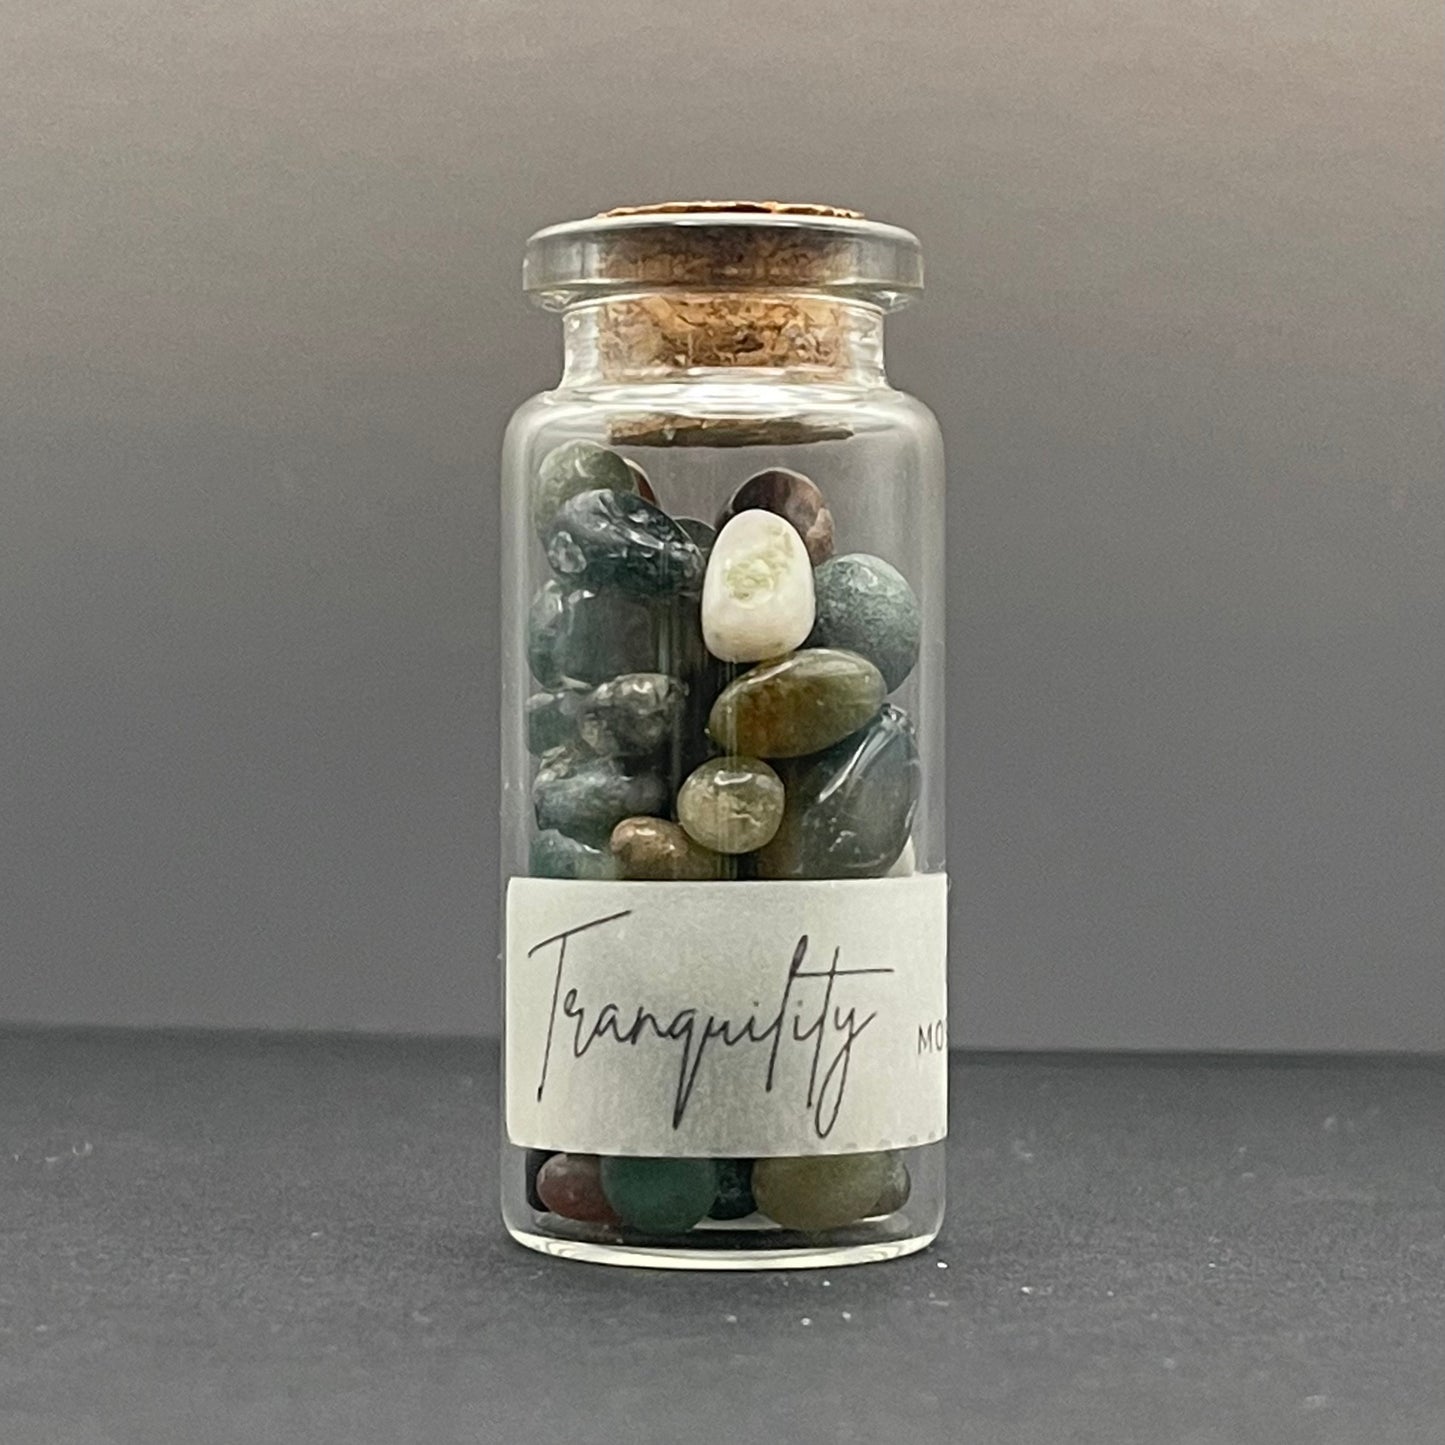 Tranquility | Green Moss Agate Crystal Chips 10ml Vial